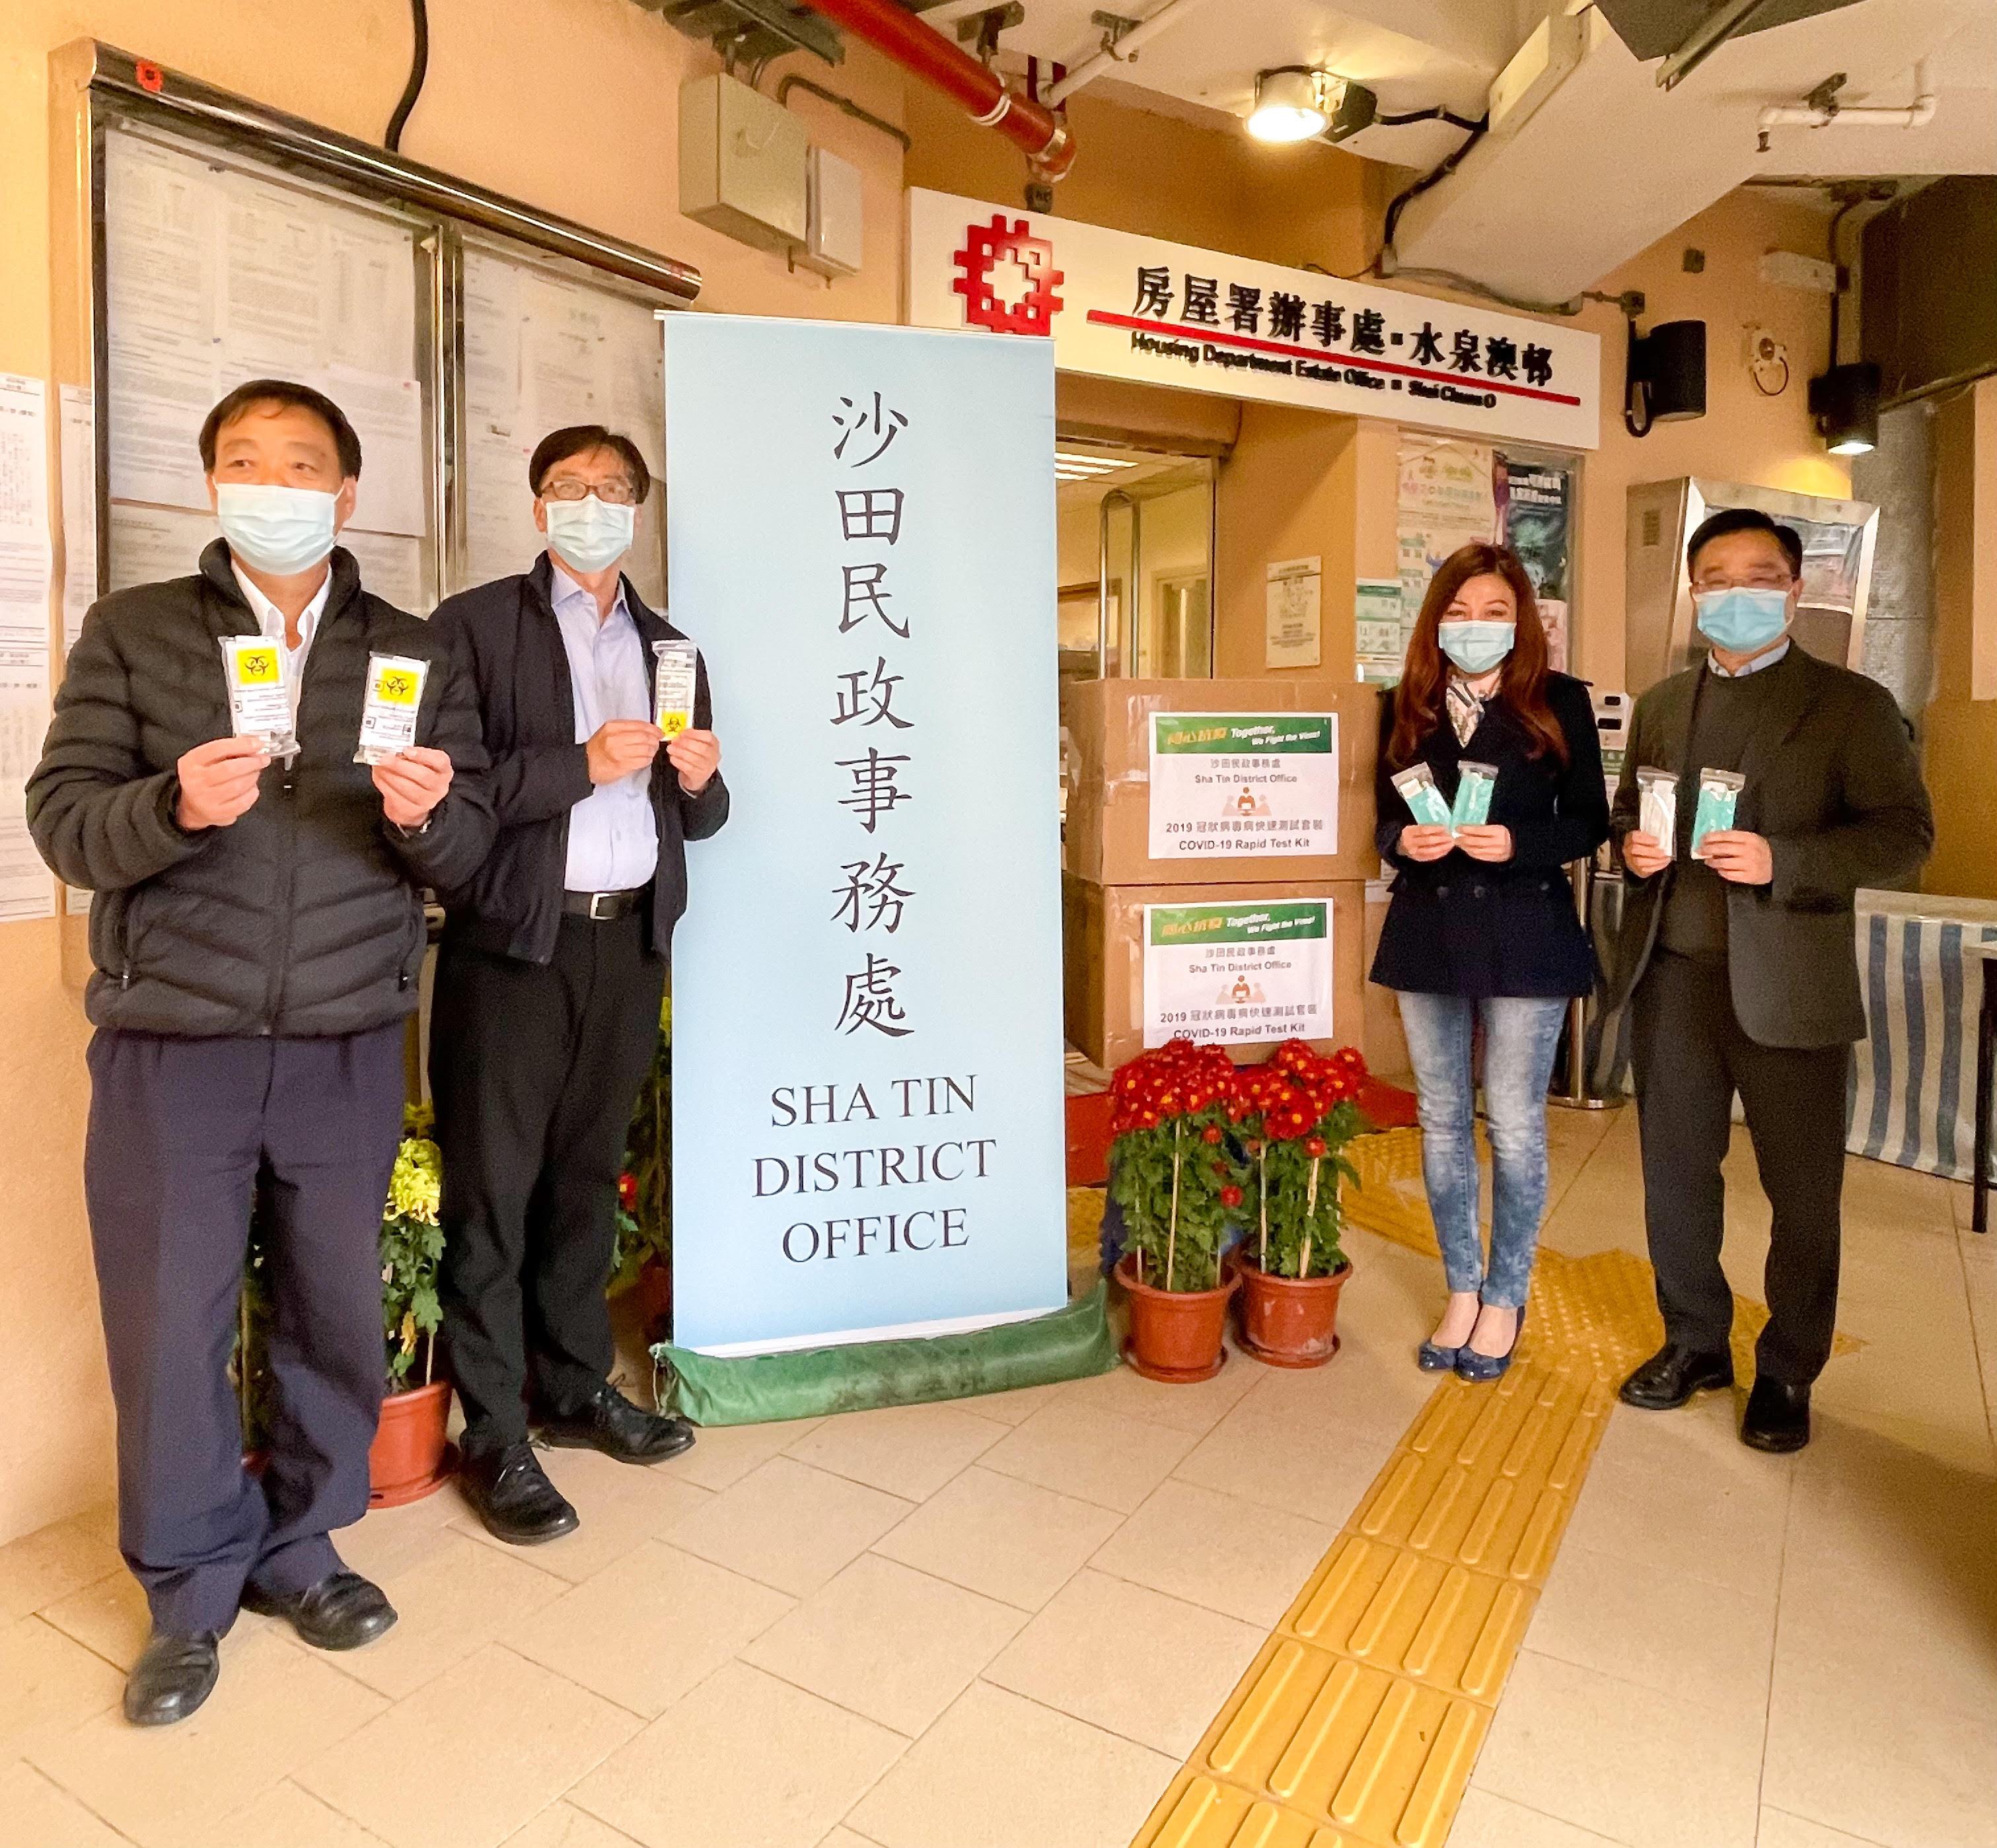 The Sha Tin District Office today (February 17) distributed rapid test kits to cleansing workers and property management staff working in Shui Chuen O Estate for voluntary testing through the Housing Department and the property management company.

